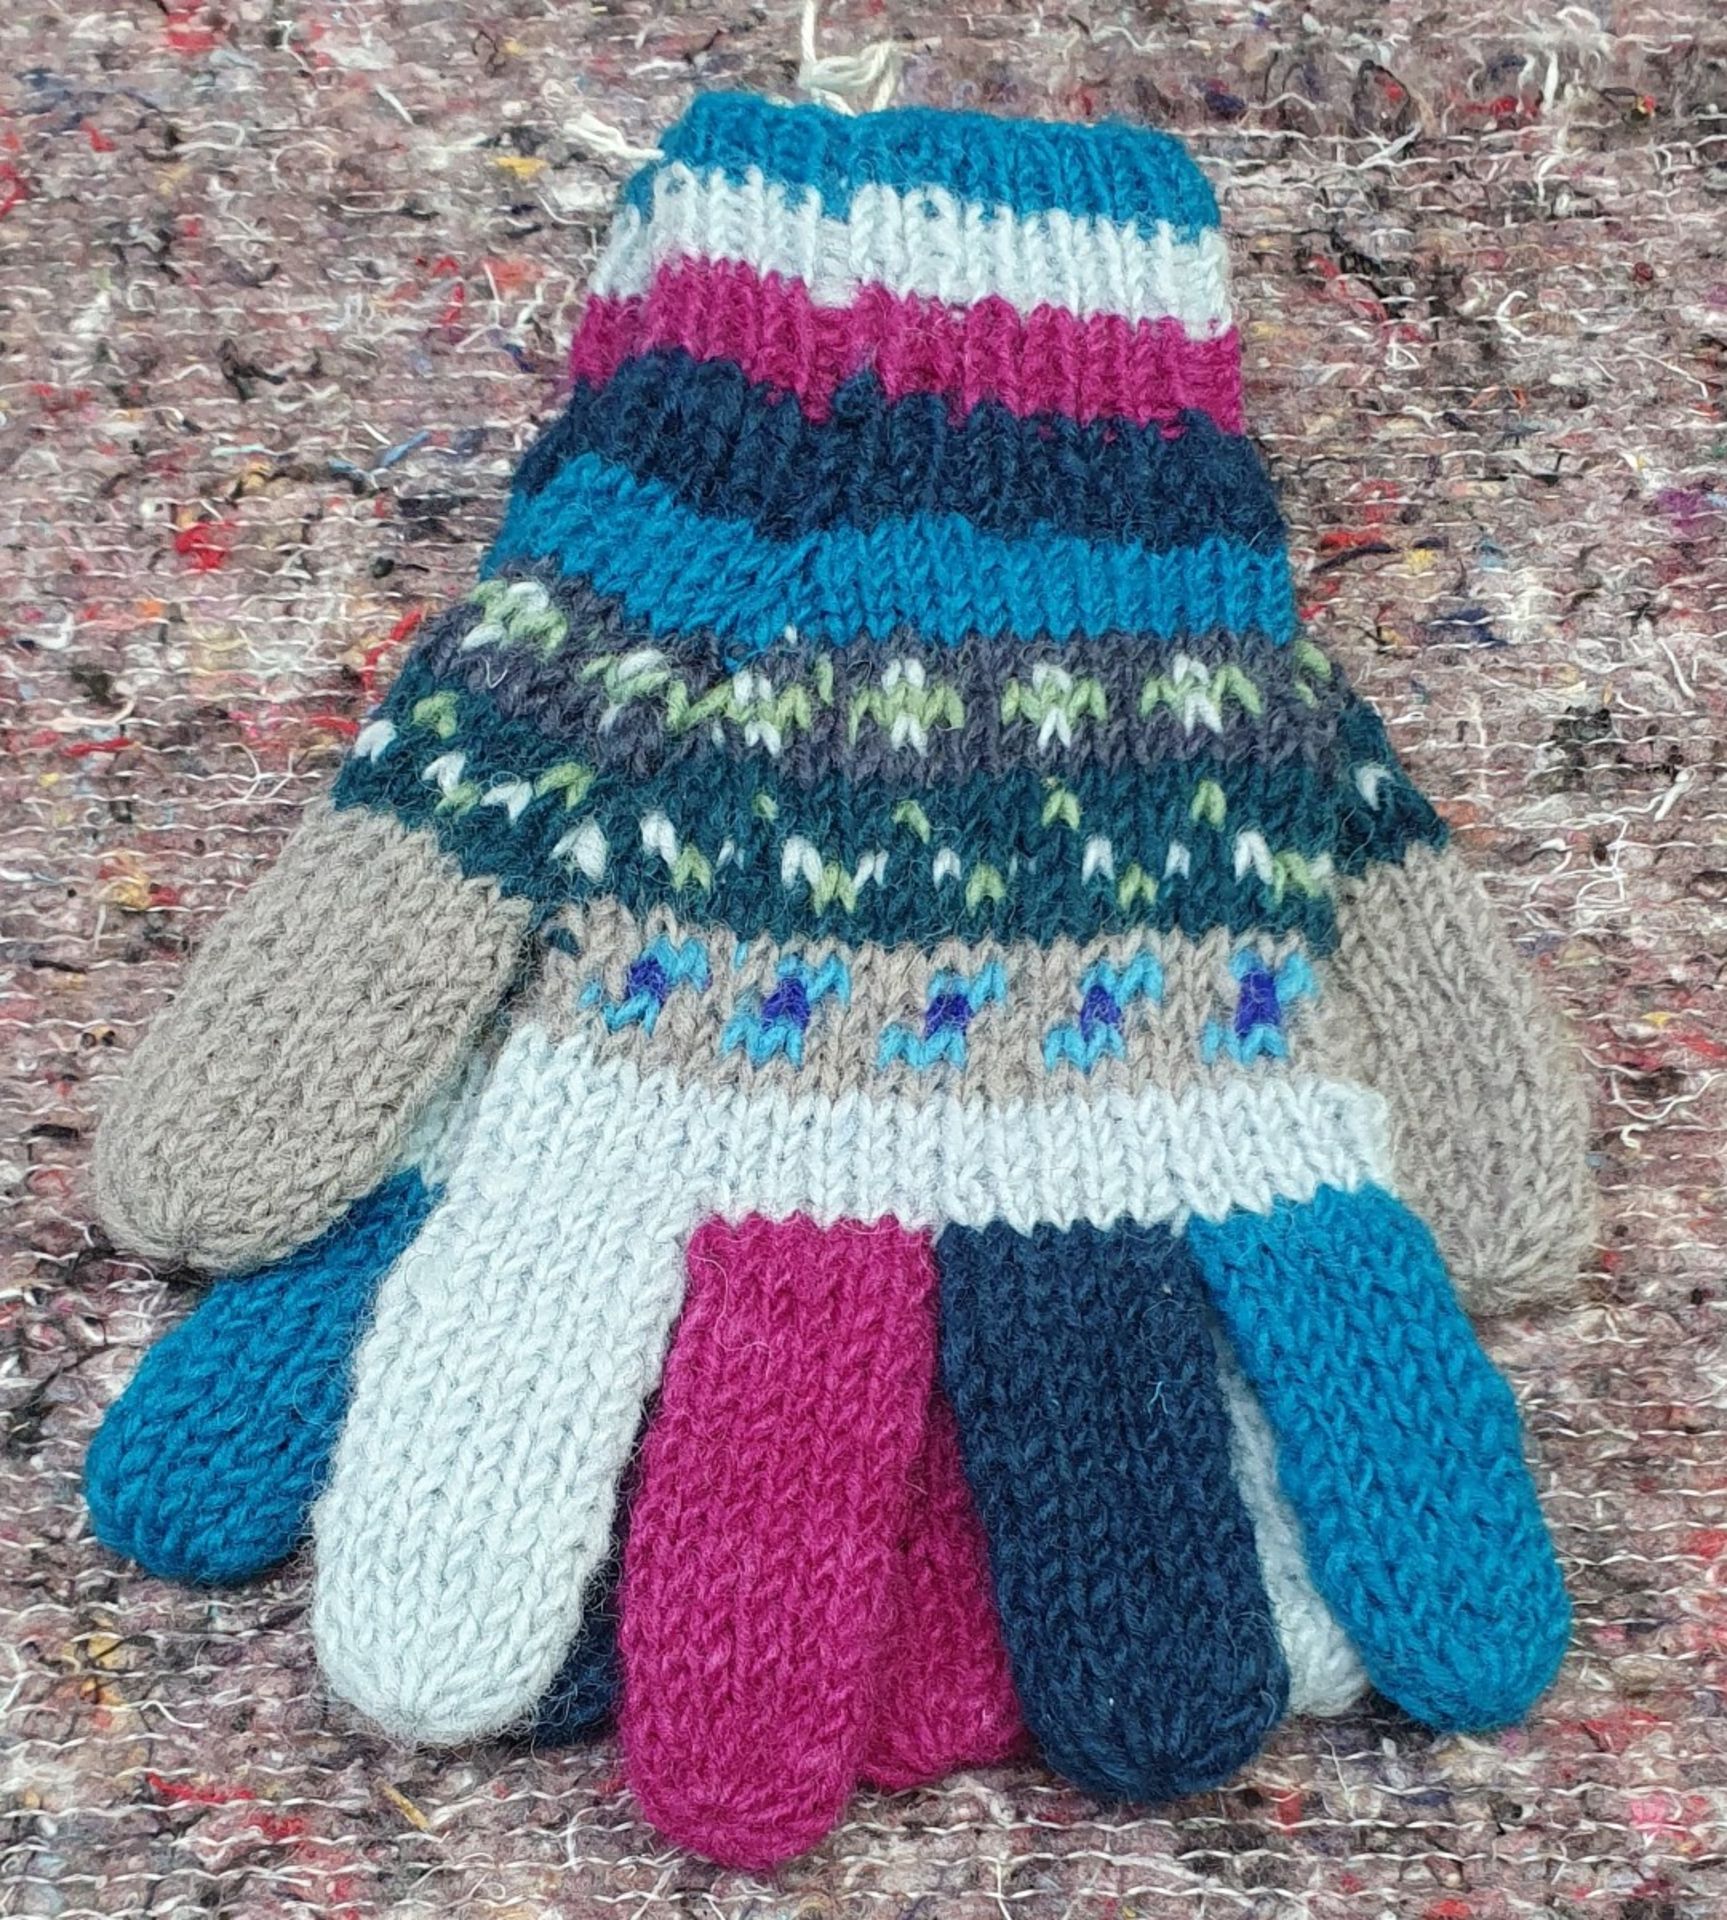 13 x Assorted Bobble Hats and Woolly Gloves by From The Source - New Stock - Ref: TCH236 - CL840 - - Image 19 of 24